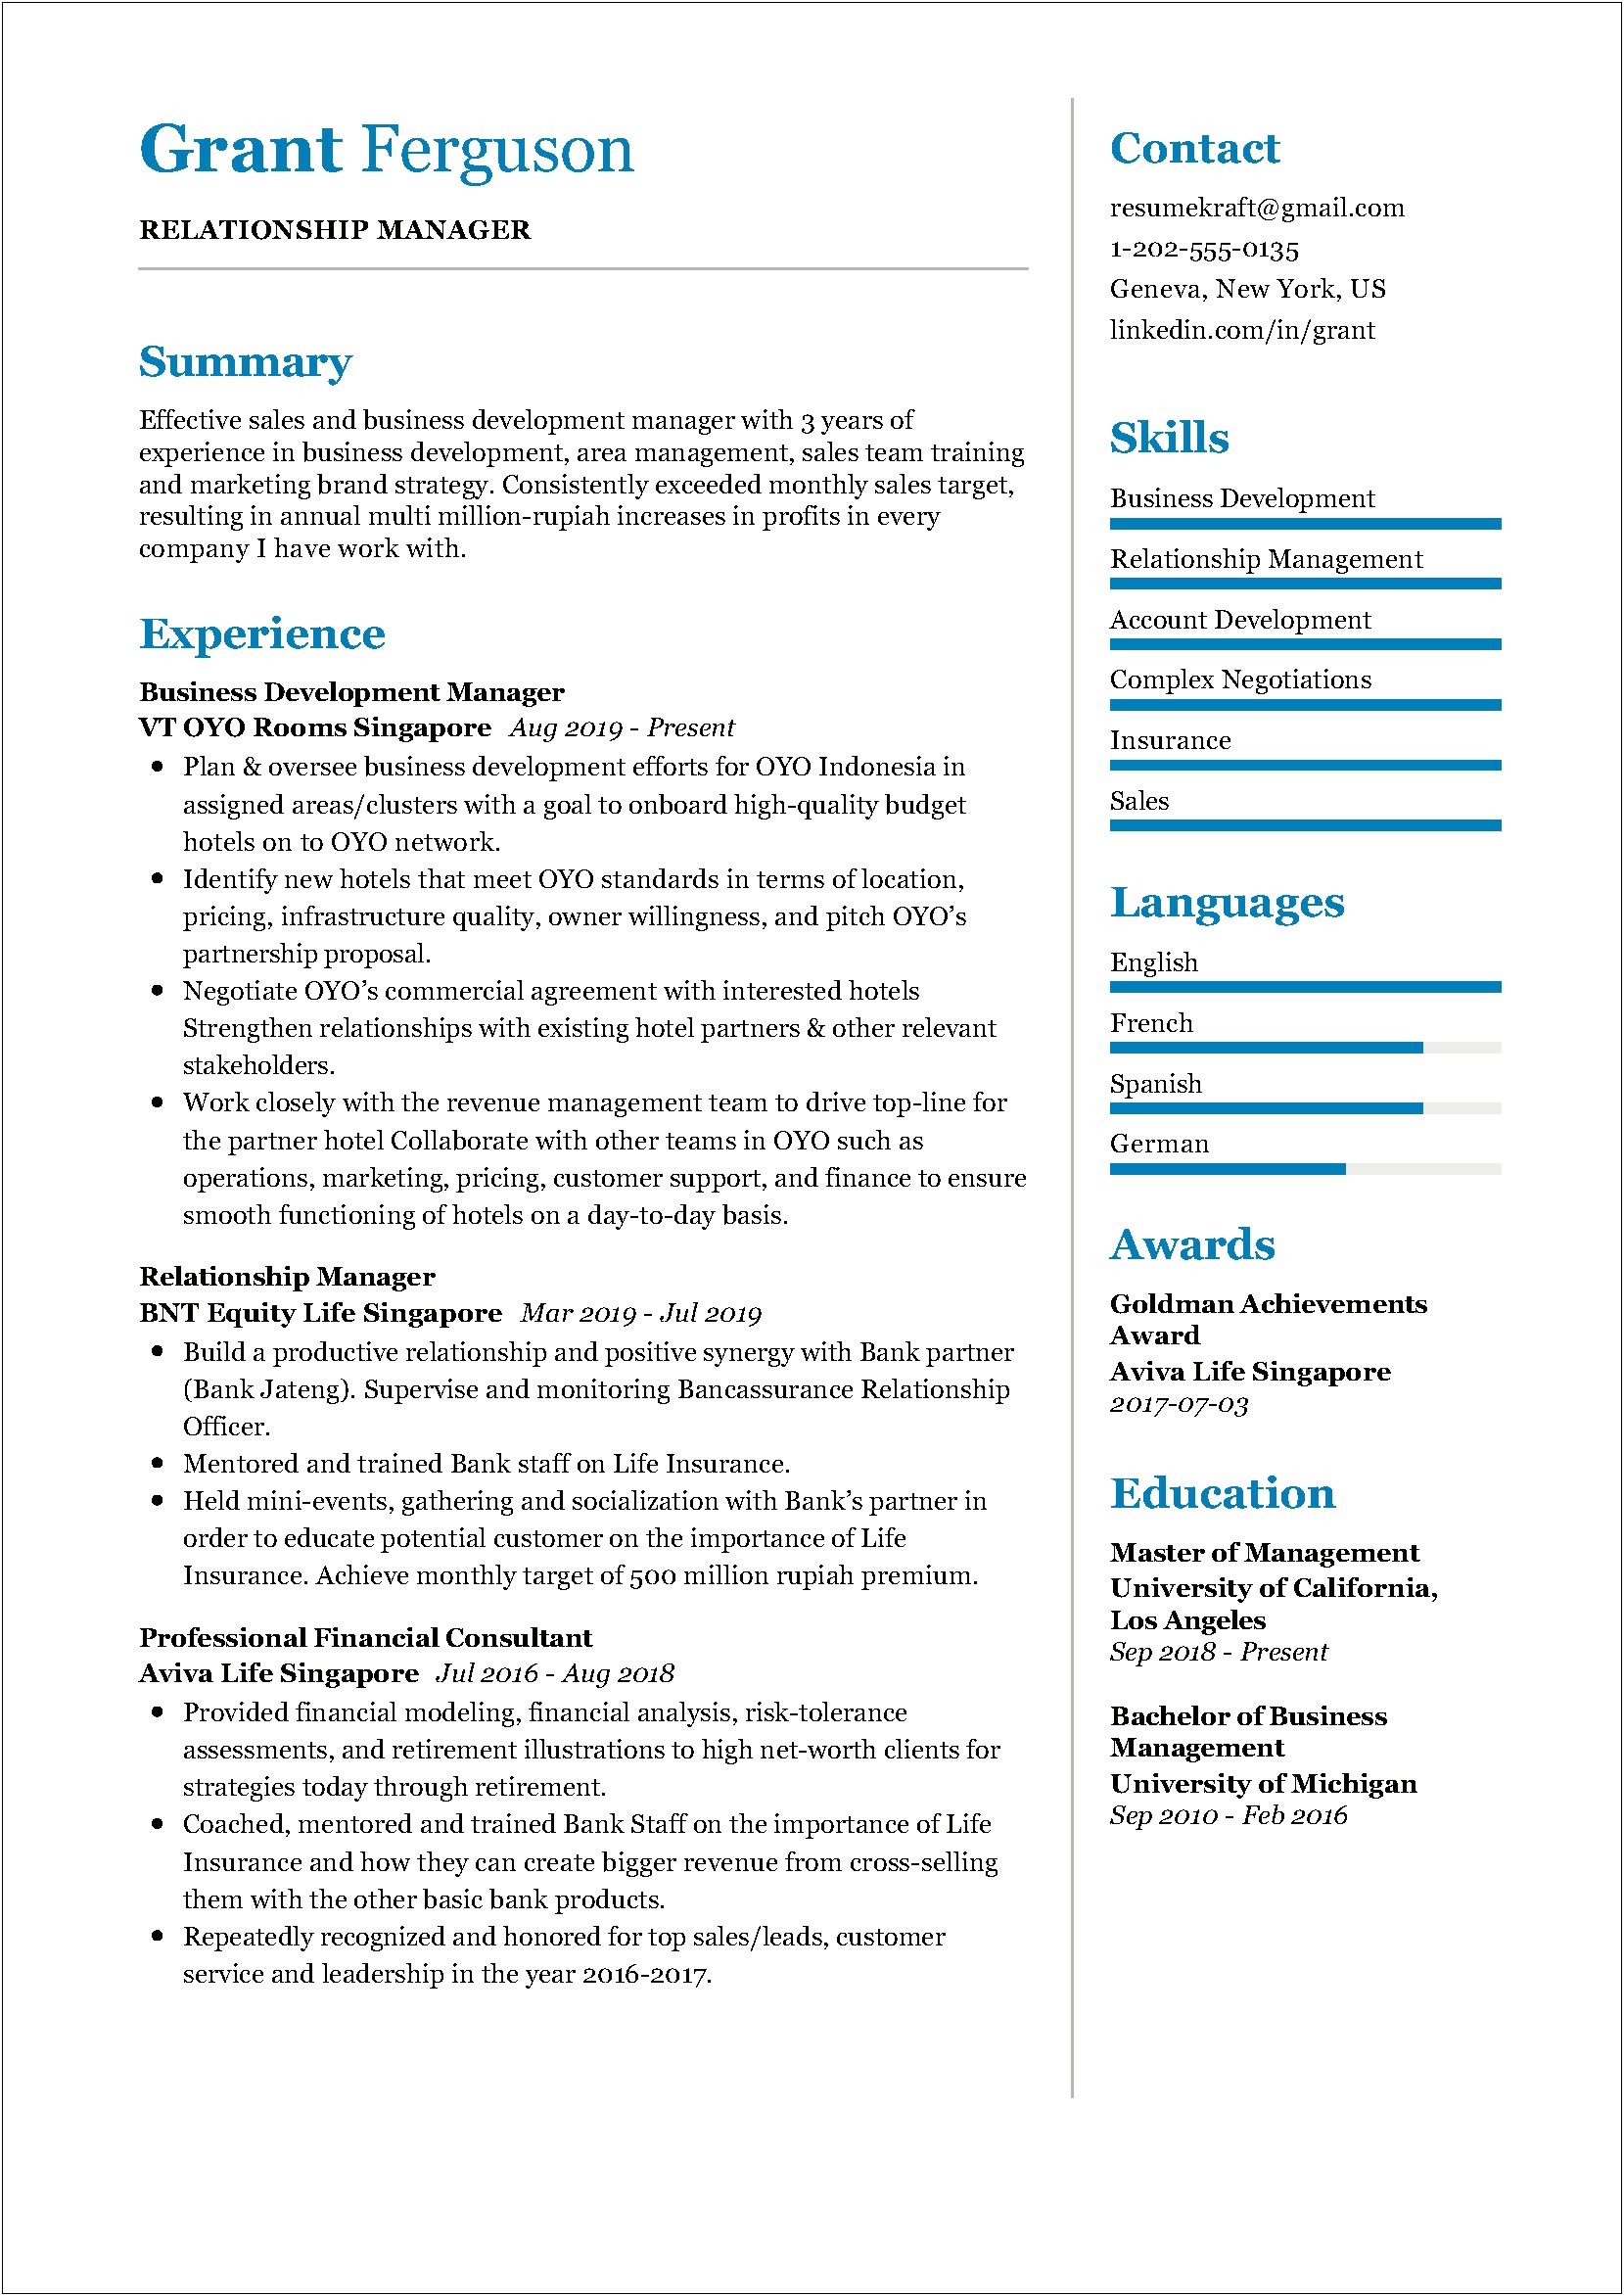 Resume Showing Management Of Team